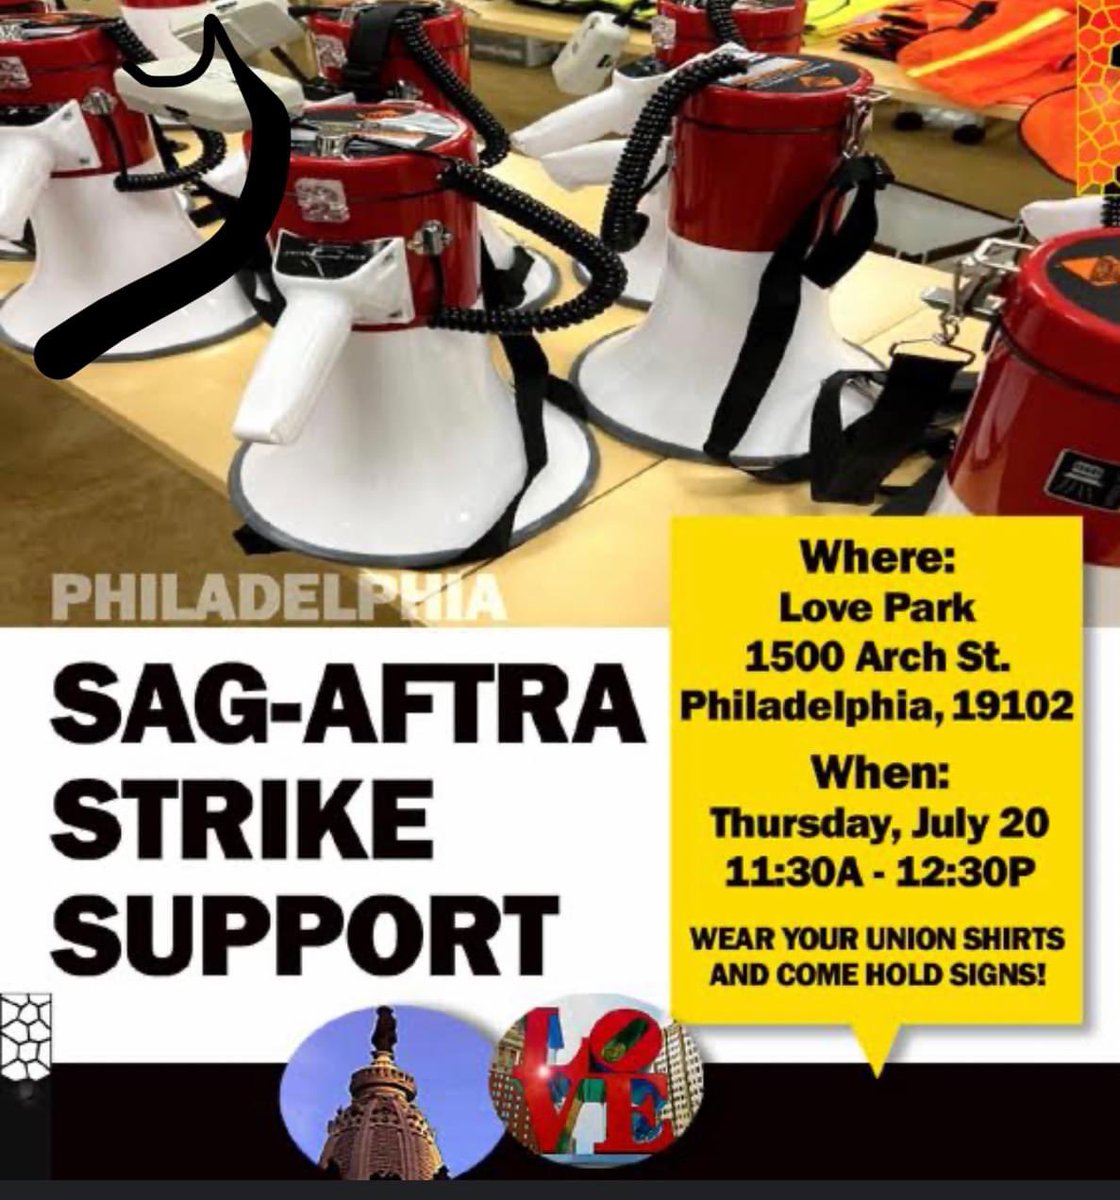 Yo #Philly! Thursday at 11:30 come to  #LovePark and show the world how much love Philly has for our actors! Join the talented Philly #sagaftramembers and our special guest. Bring signs and be loud! #unionstrong